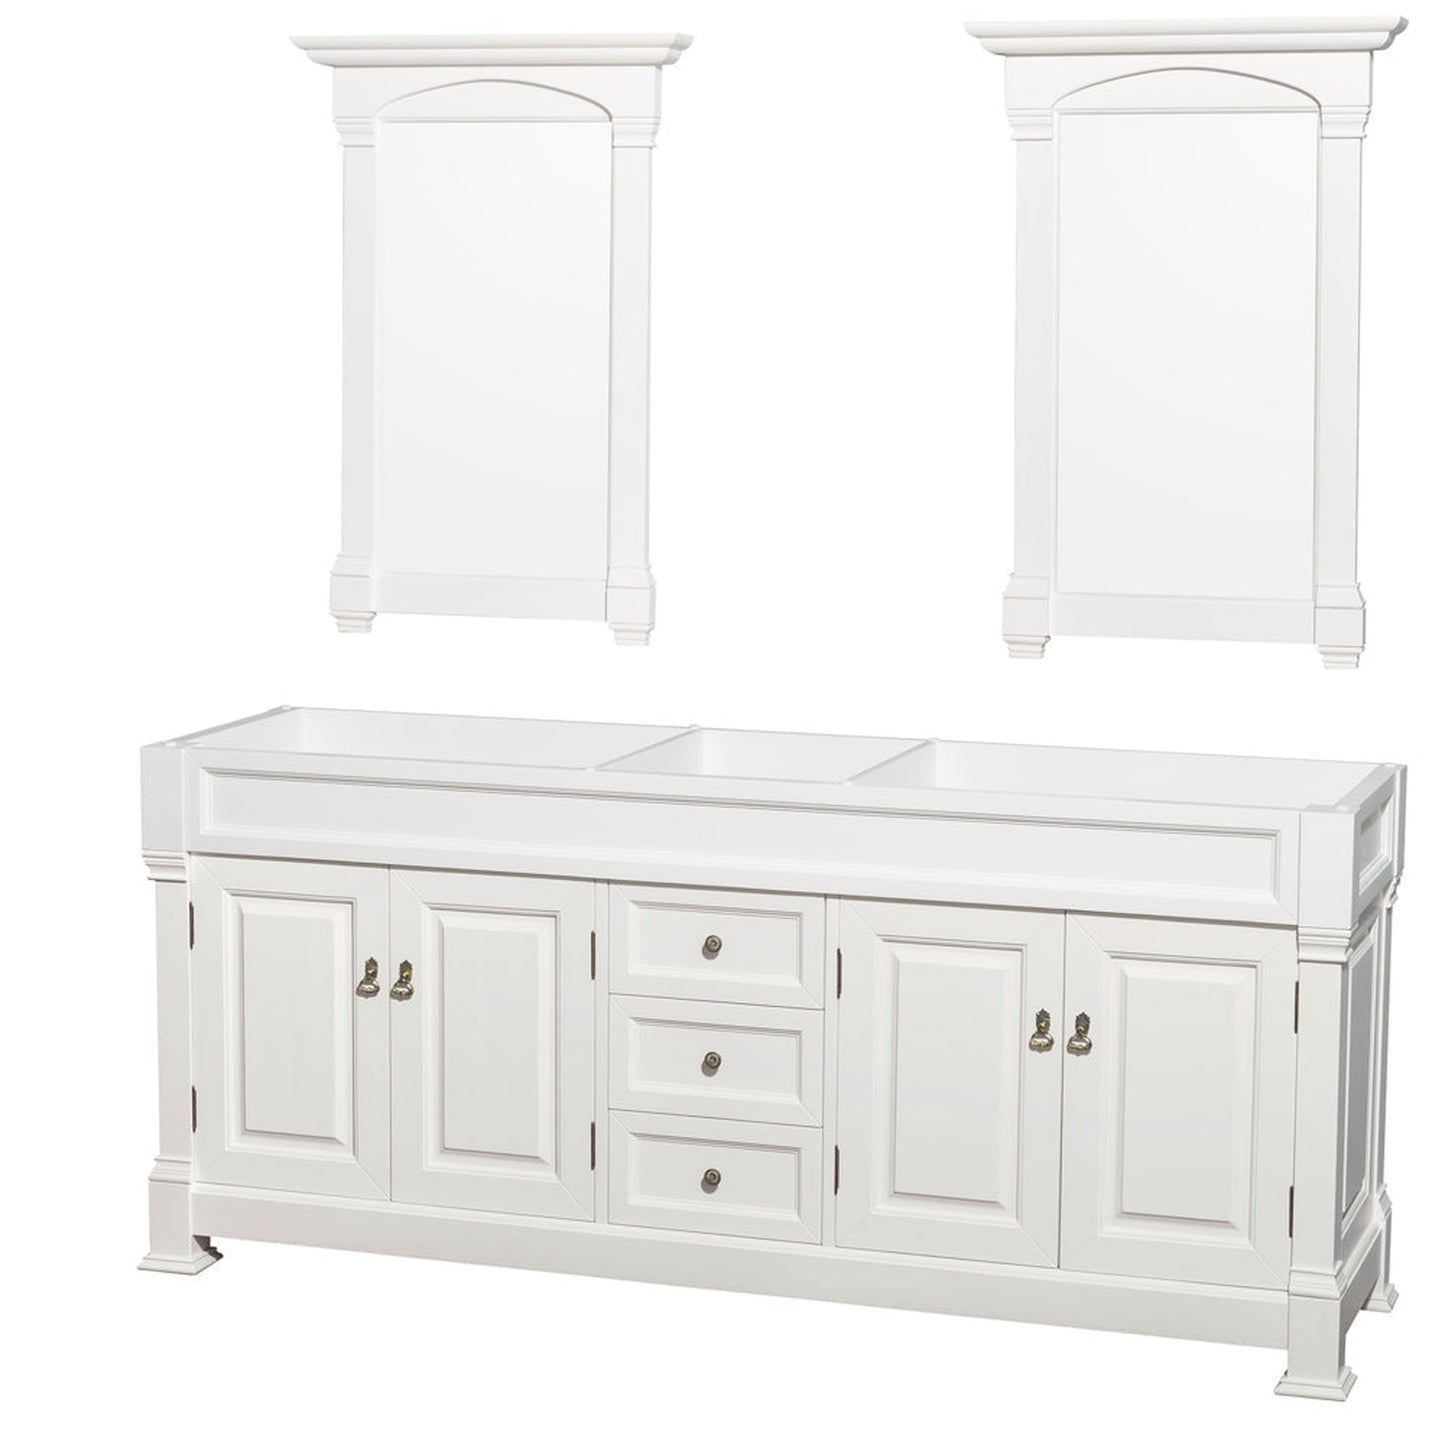 Wyndham Collection Andover 80" Double Bathroom Vanity in White With White Carrara Marble Countertop, Undermount Oval Sink & 28" Mirror